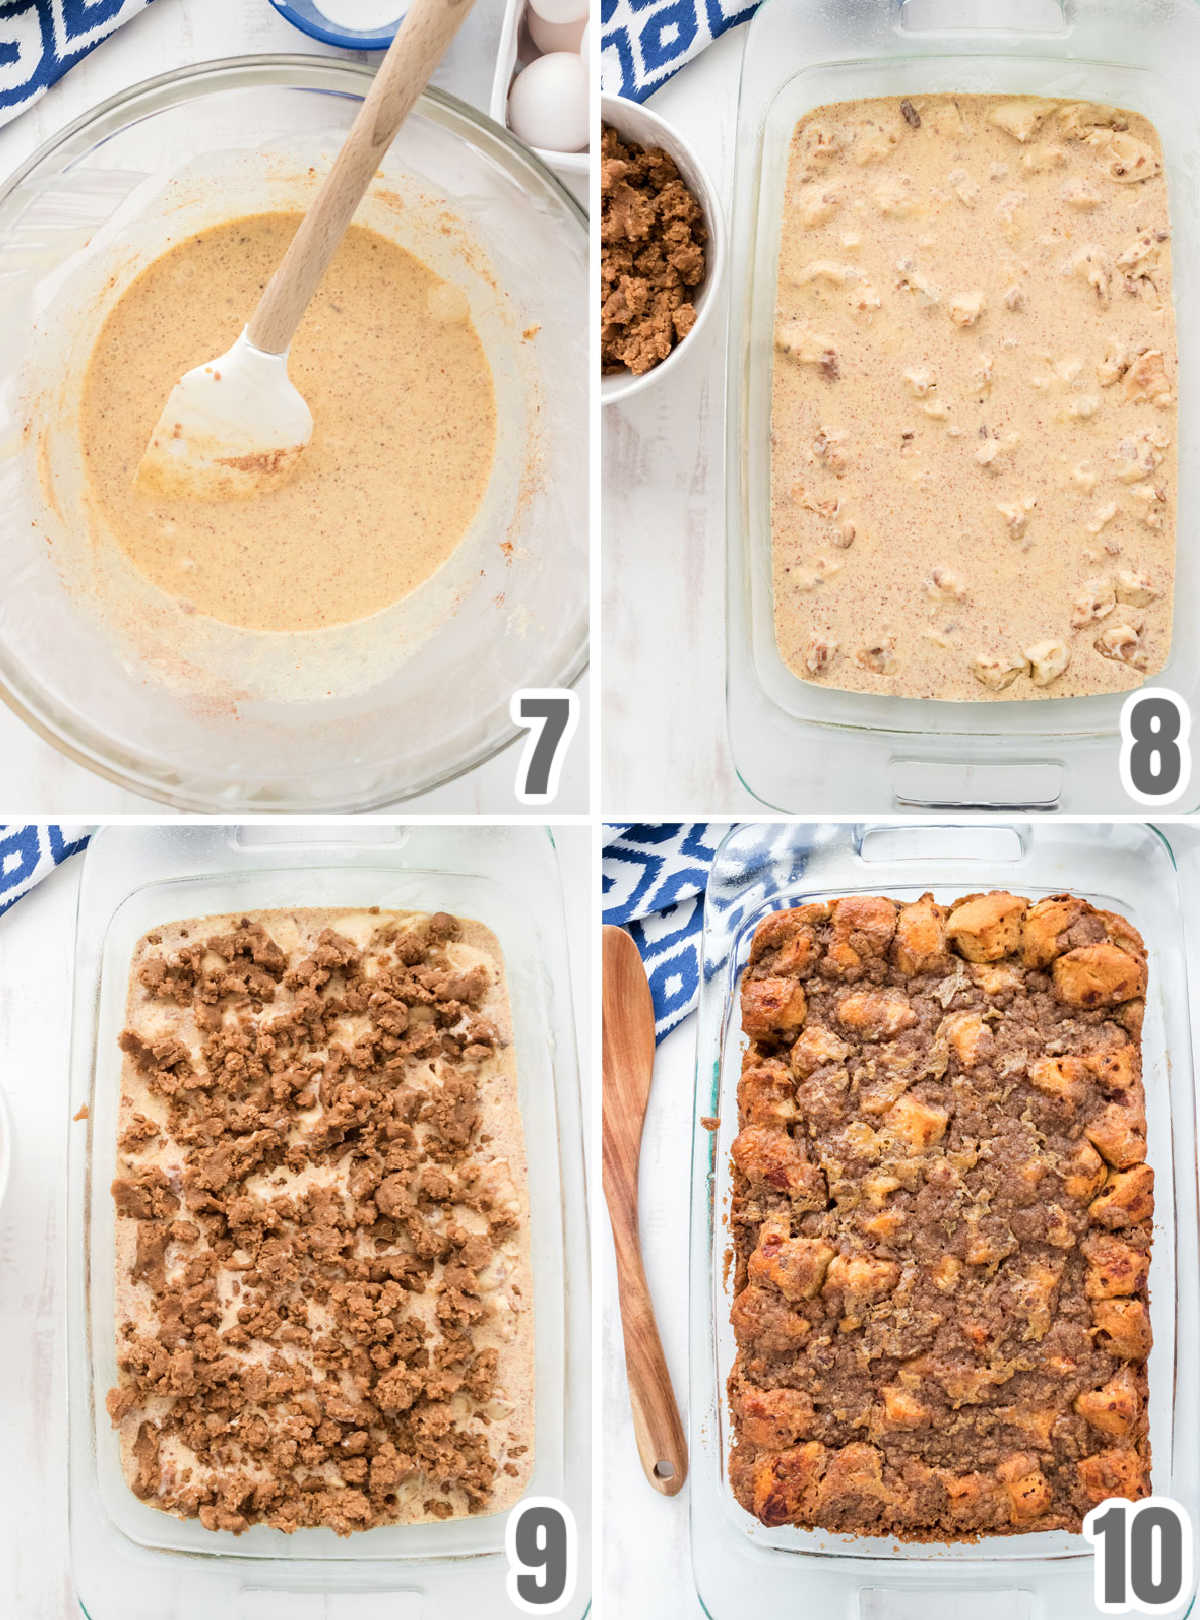 Collage image showing the steps for preparing the Cinnamon Roll Breakfast Casserole to be baked.